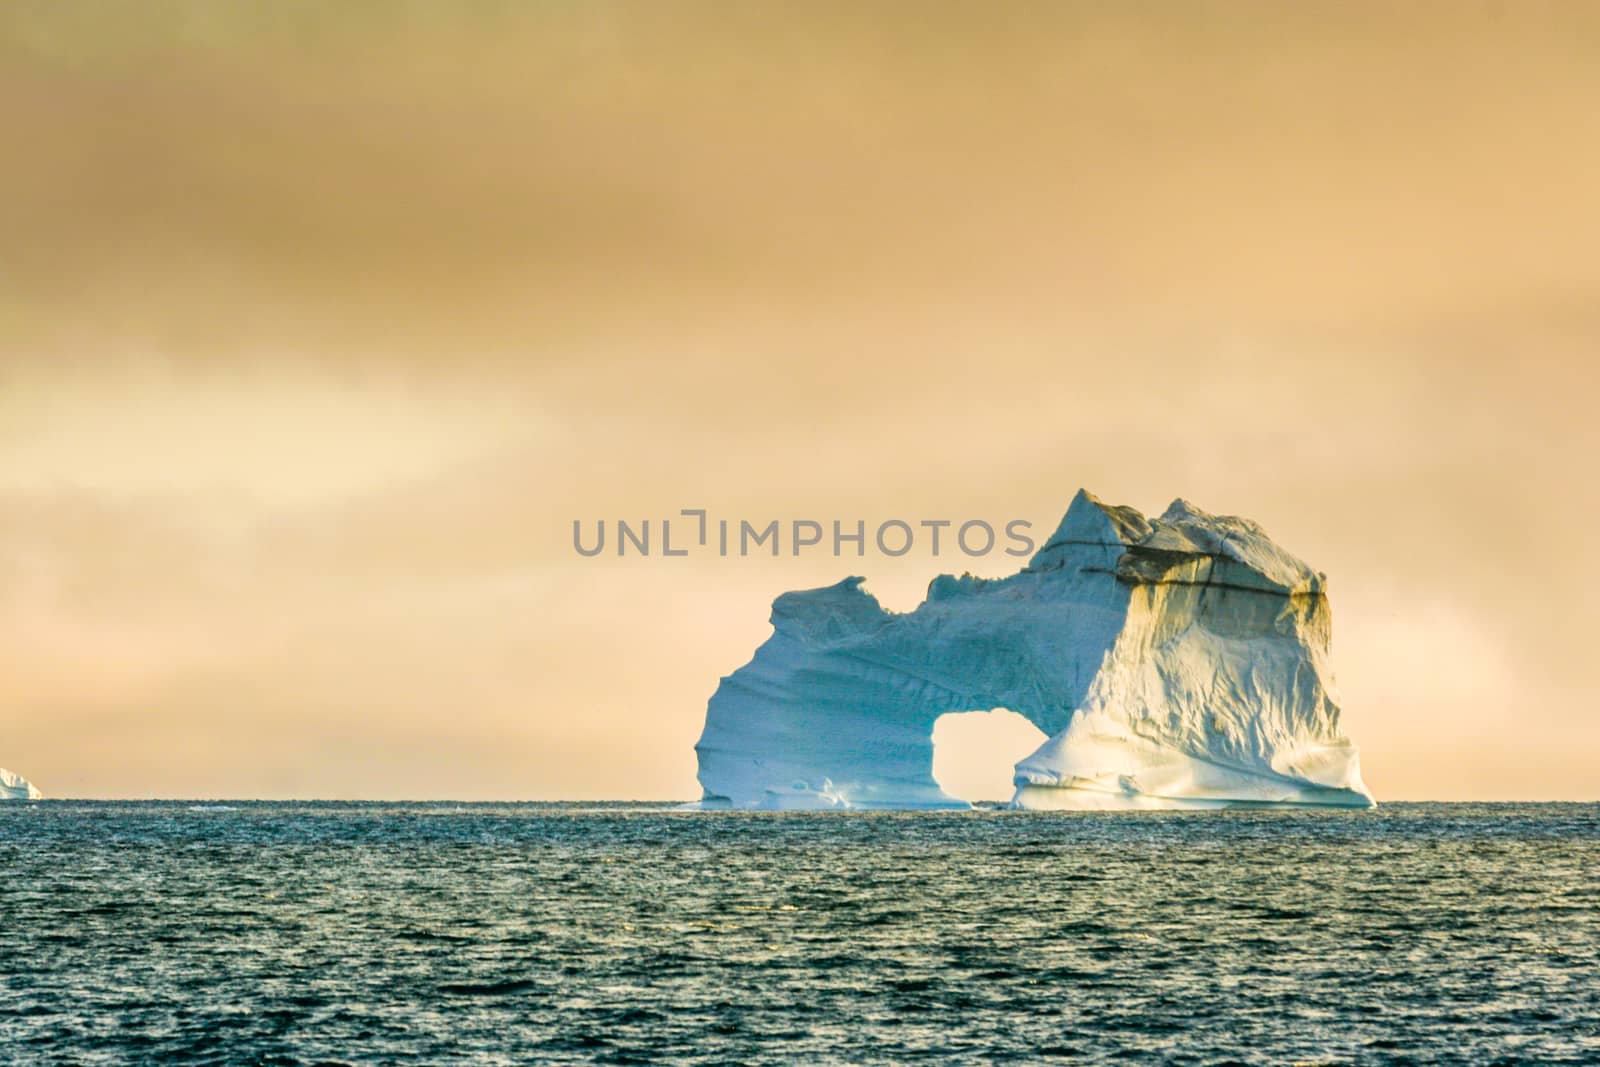 A rugged and powerful iceberg with an "O" floats in the blue Arctic ocean.